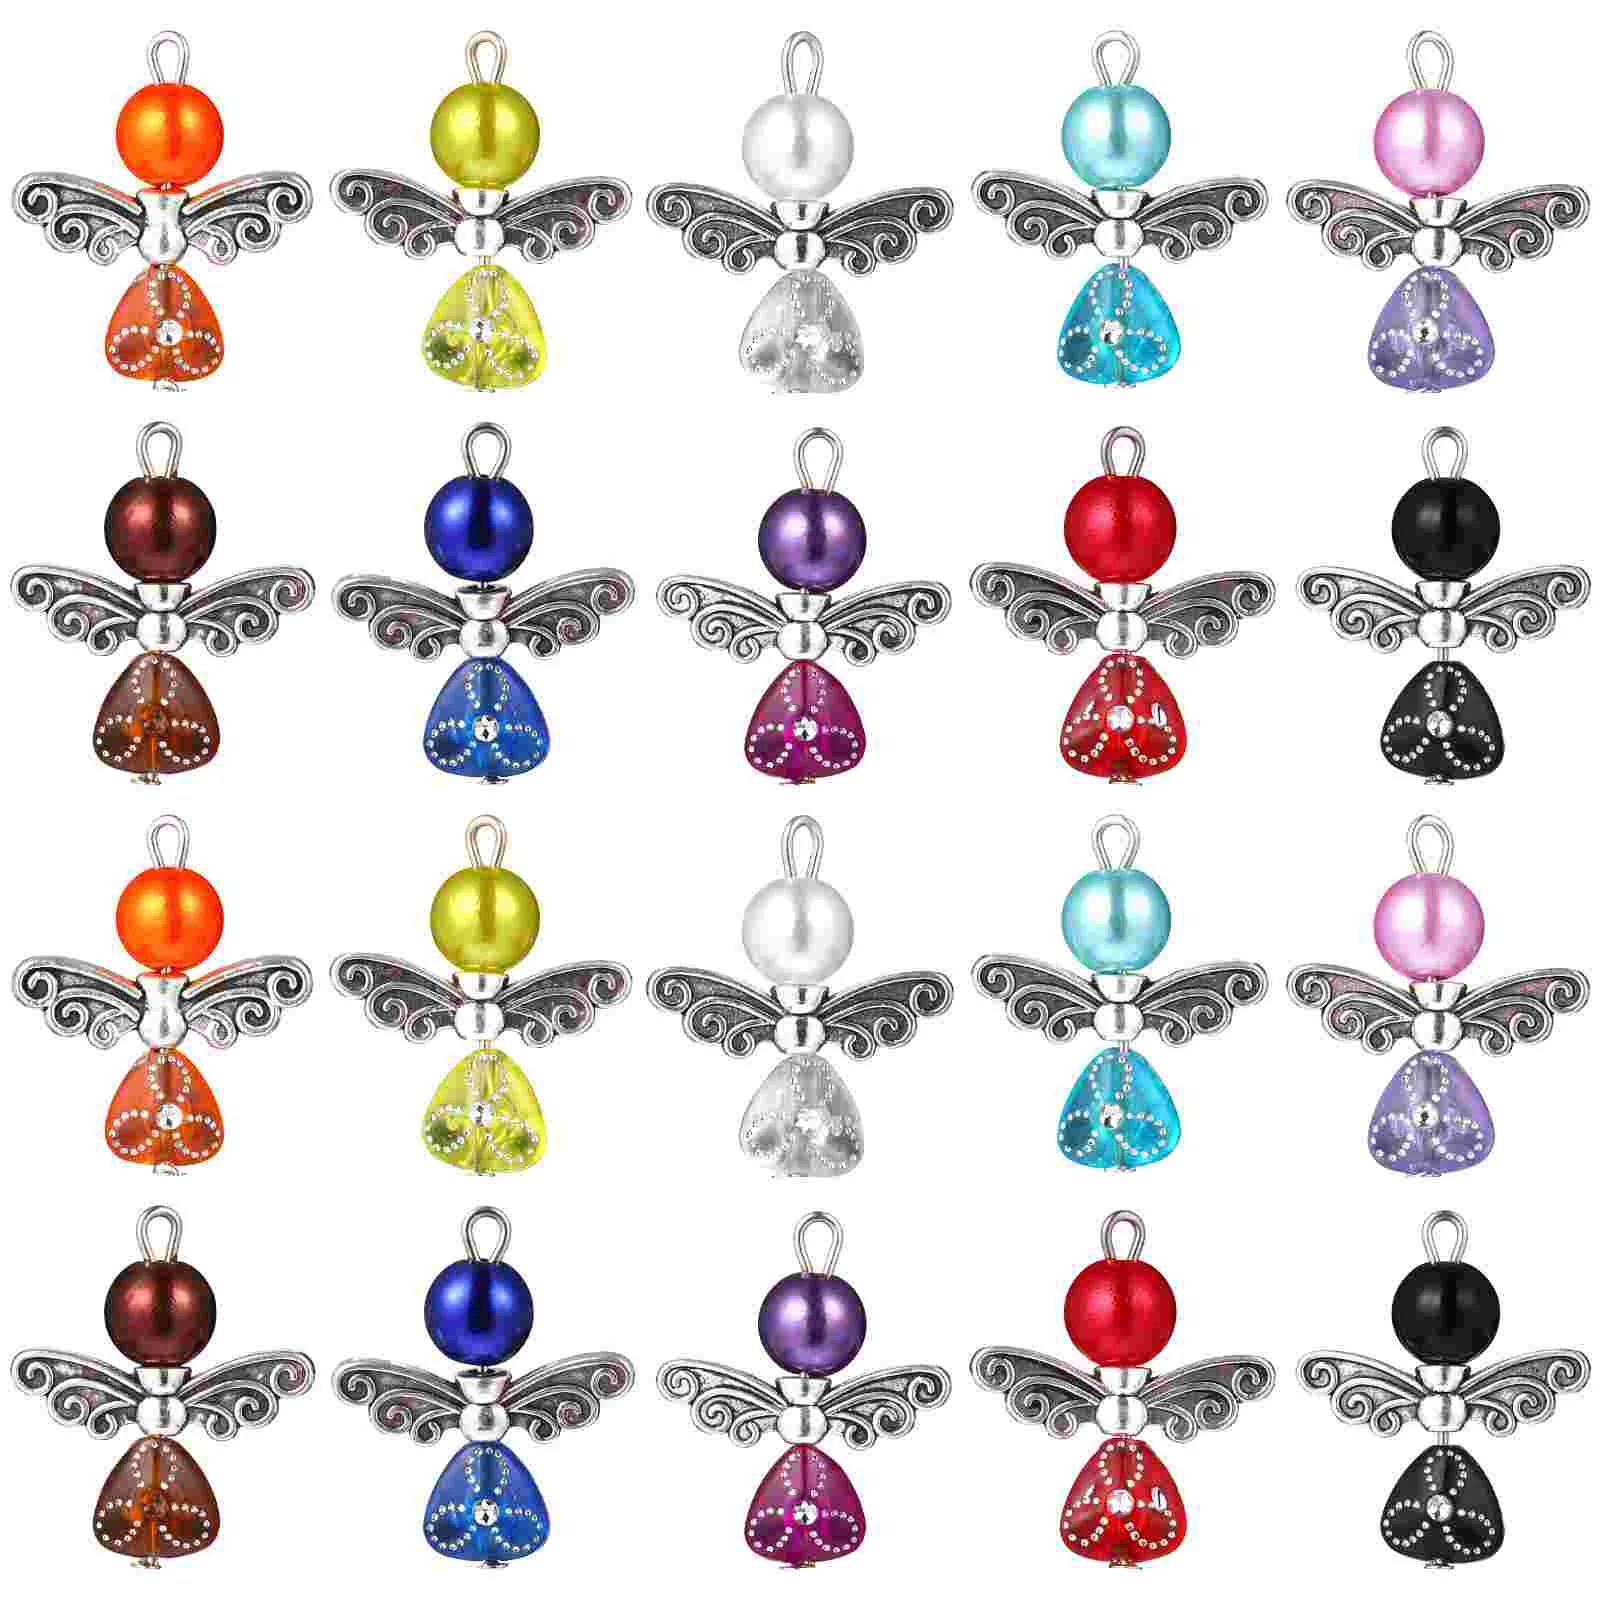 

20 Pcs Wing Pendant Accessories Wings Hanging Pendants Bead Necklace Charm Plastic Choker Jewelry Making Charms Bulk Ornaments